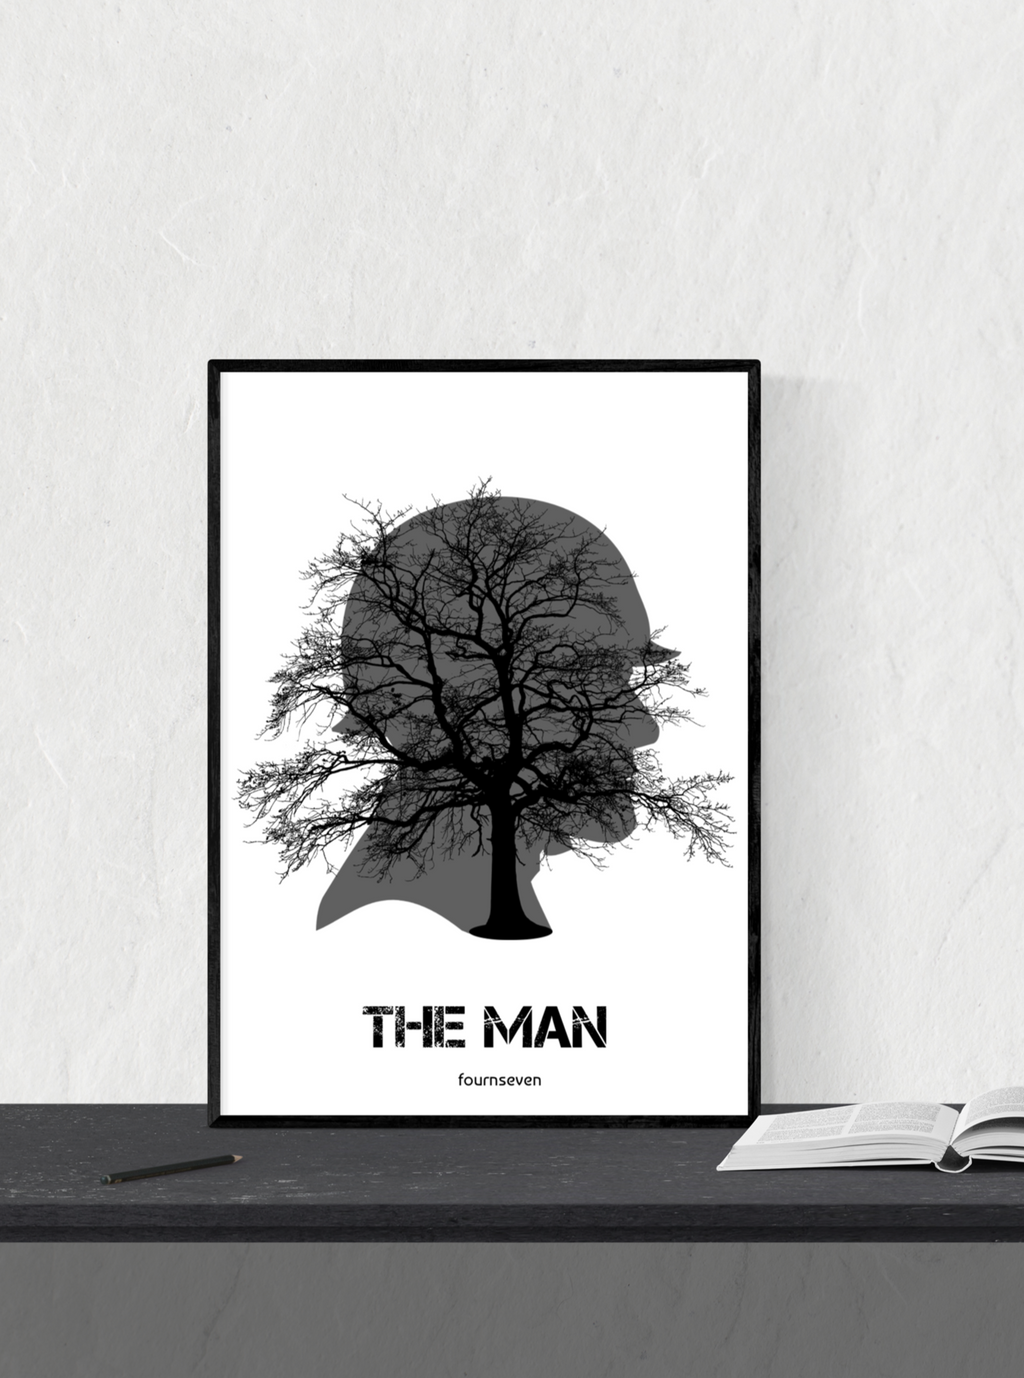 THE MAN. Soldier poster